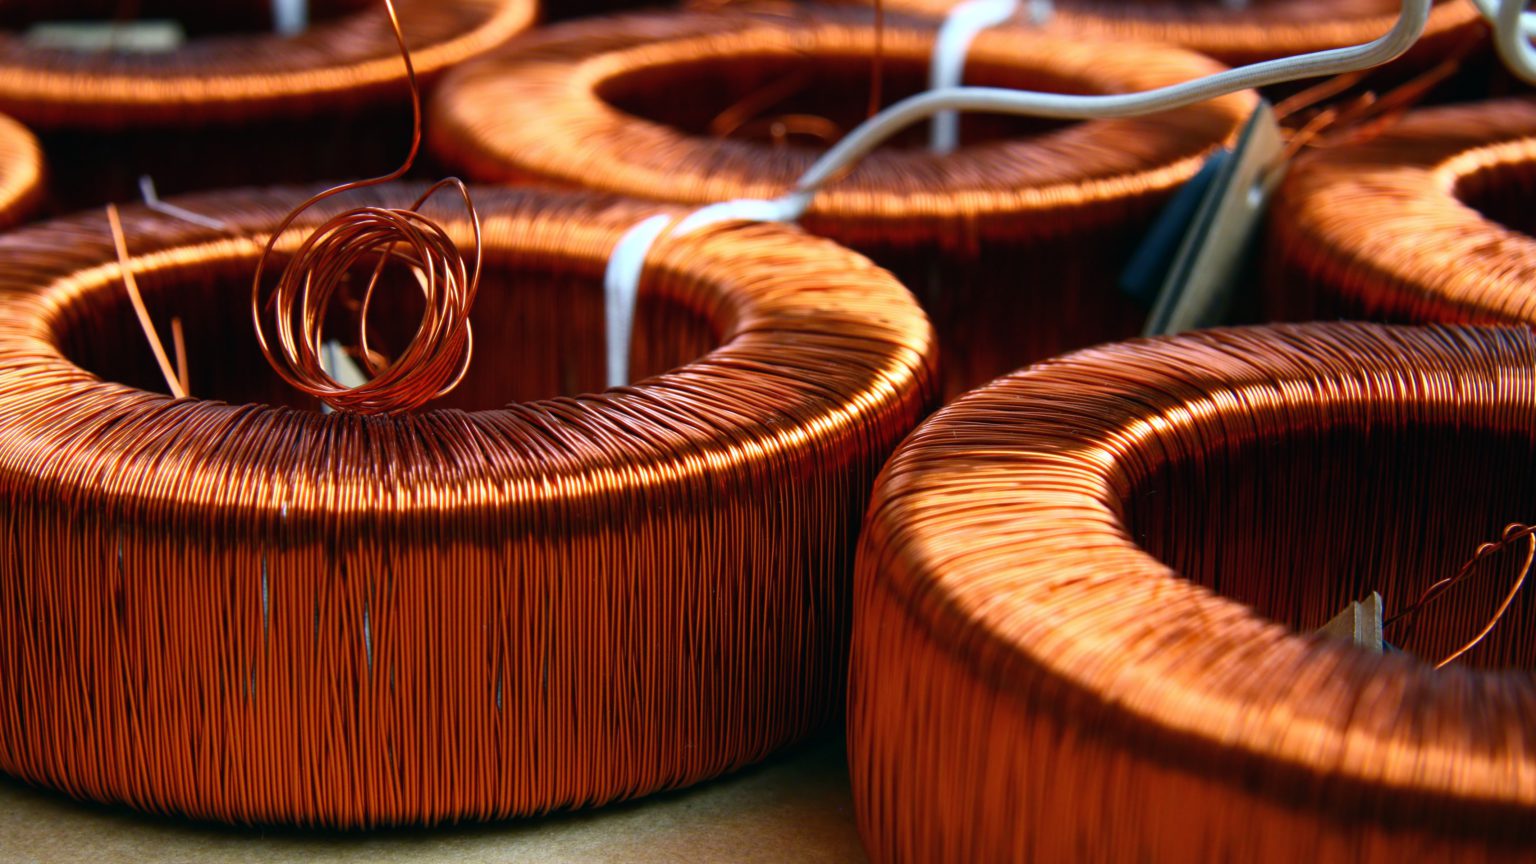 Copper price surges through $11,000 on supply squeeze